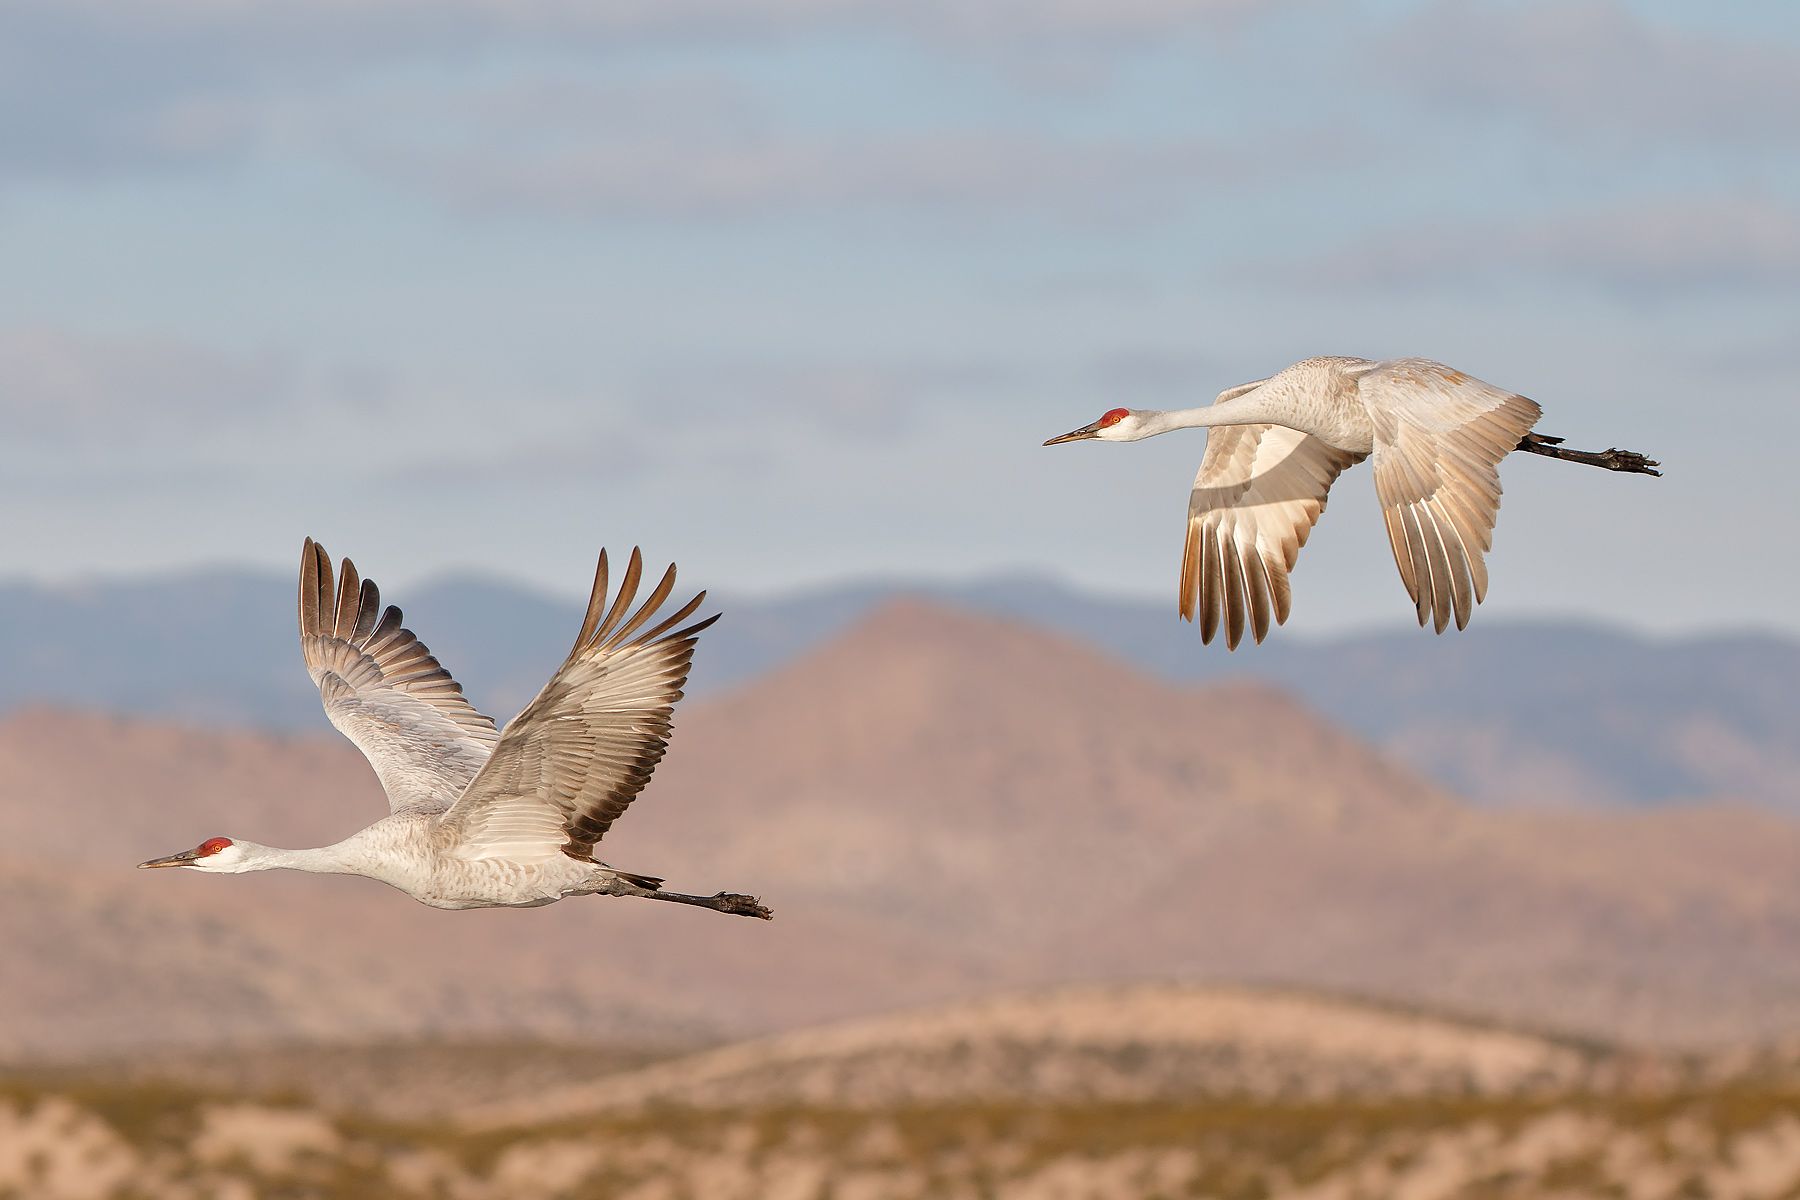 Sandhill-cranes-flying-in-sync-with-mountain-bkgd_44A0532-Bosque-del-Apache-NWR,-San-Antonio,-NM,-USA.jpg